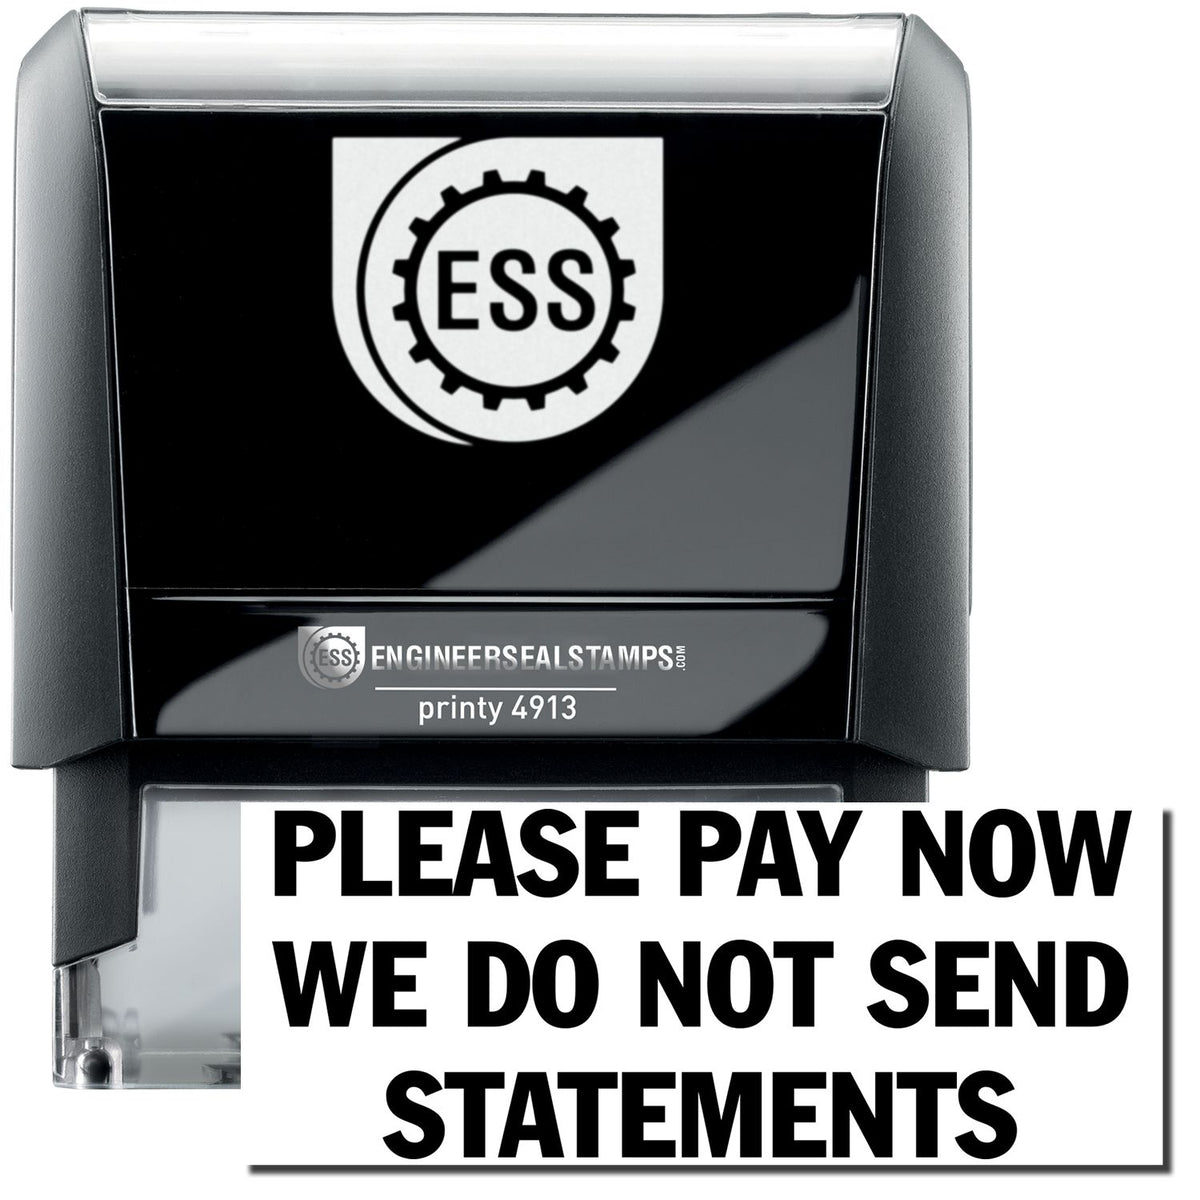 A self-inking stamp with a stamped image showing how the text &quot;PLEASE PAY NOW WE DO NOT SEND STATEMENTS&quot; in a large font is displayed by it after stamping.